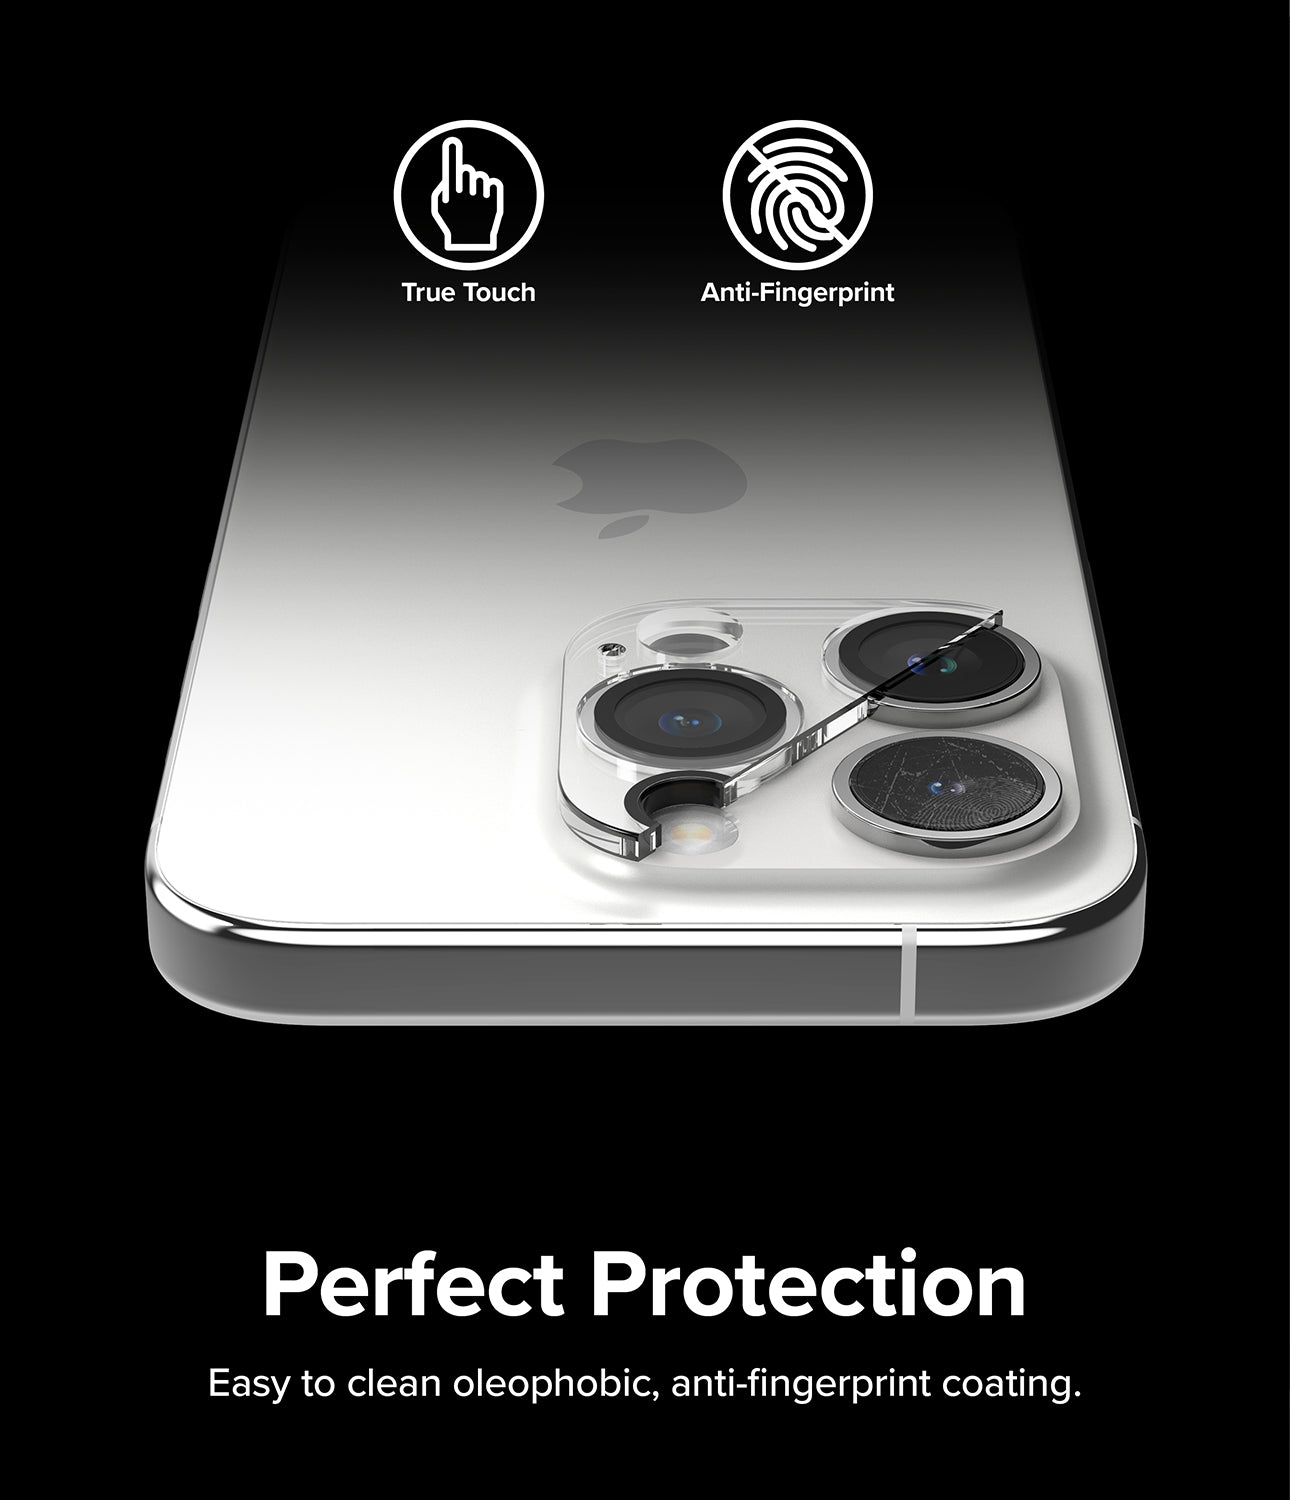 iPhone 15 Pro | Camera Protector Glass [2 Pack]